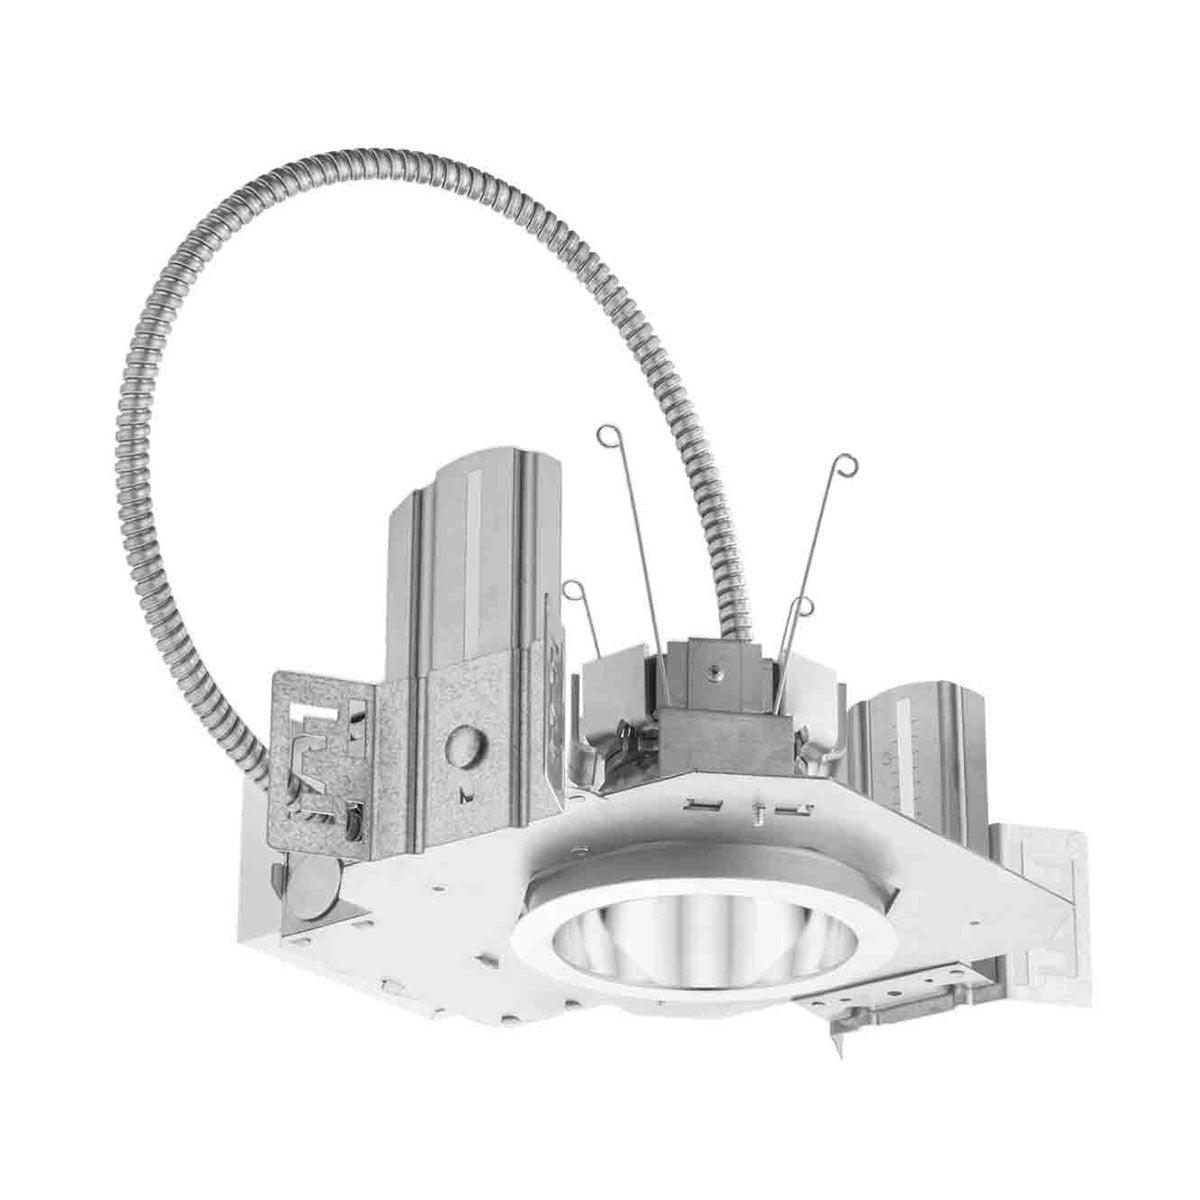 Lithonia LDN4 Commercial LED Recessed Downlight, 1500 lumens, 3500K (Reflector Sold Separately)